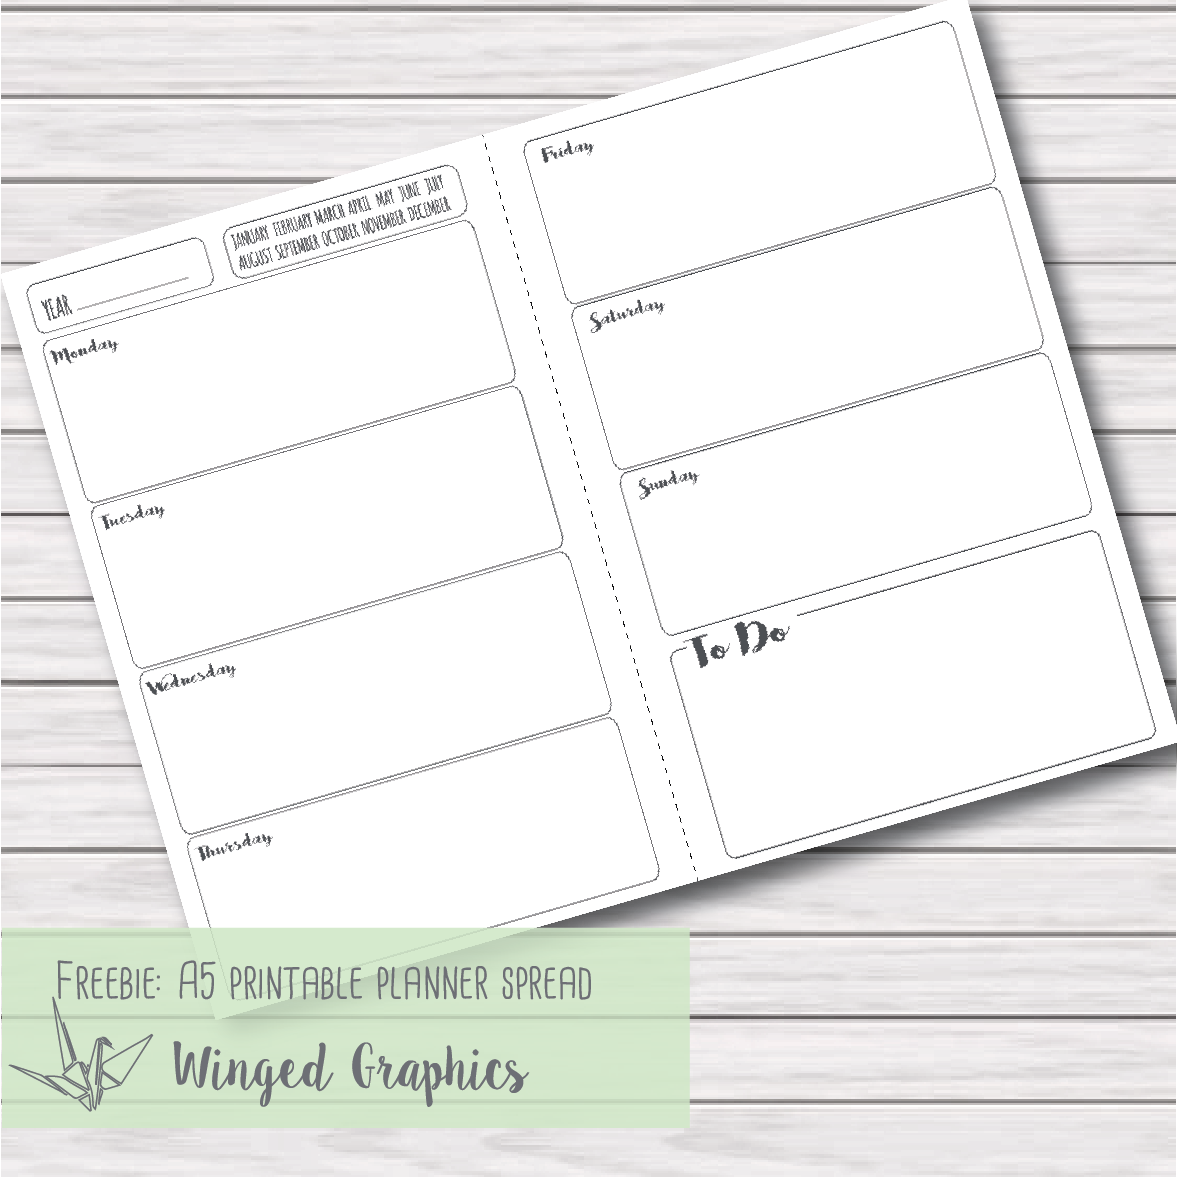 Winged Graphics FREEBIE FRIDAY 3 PRINTABLE A5 PLANNER INSERTS